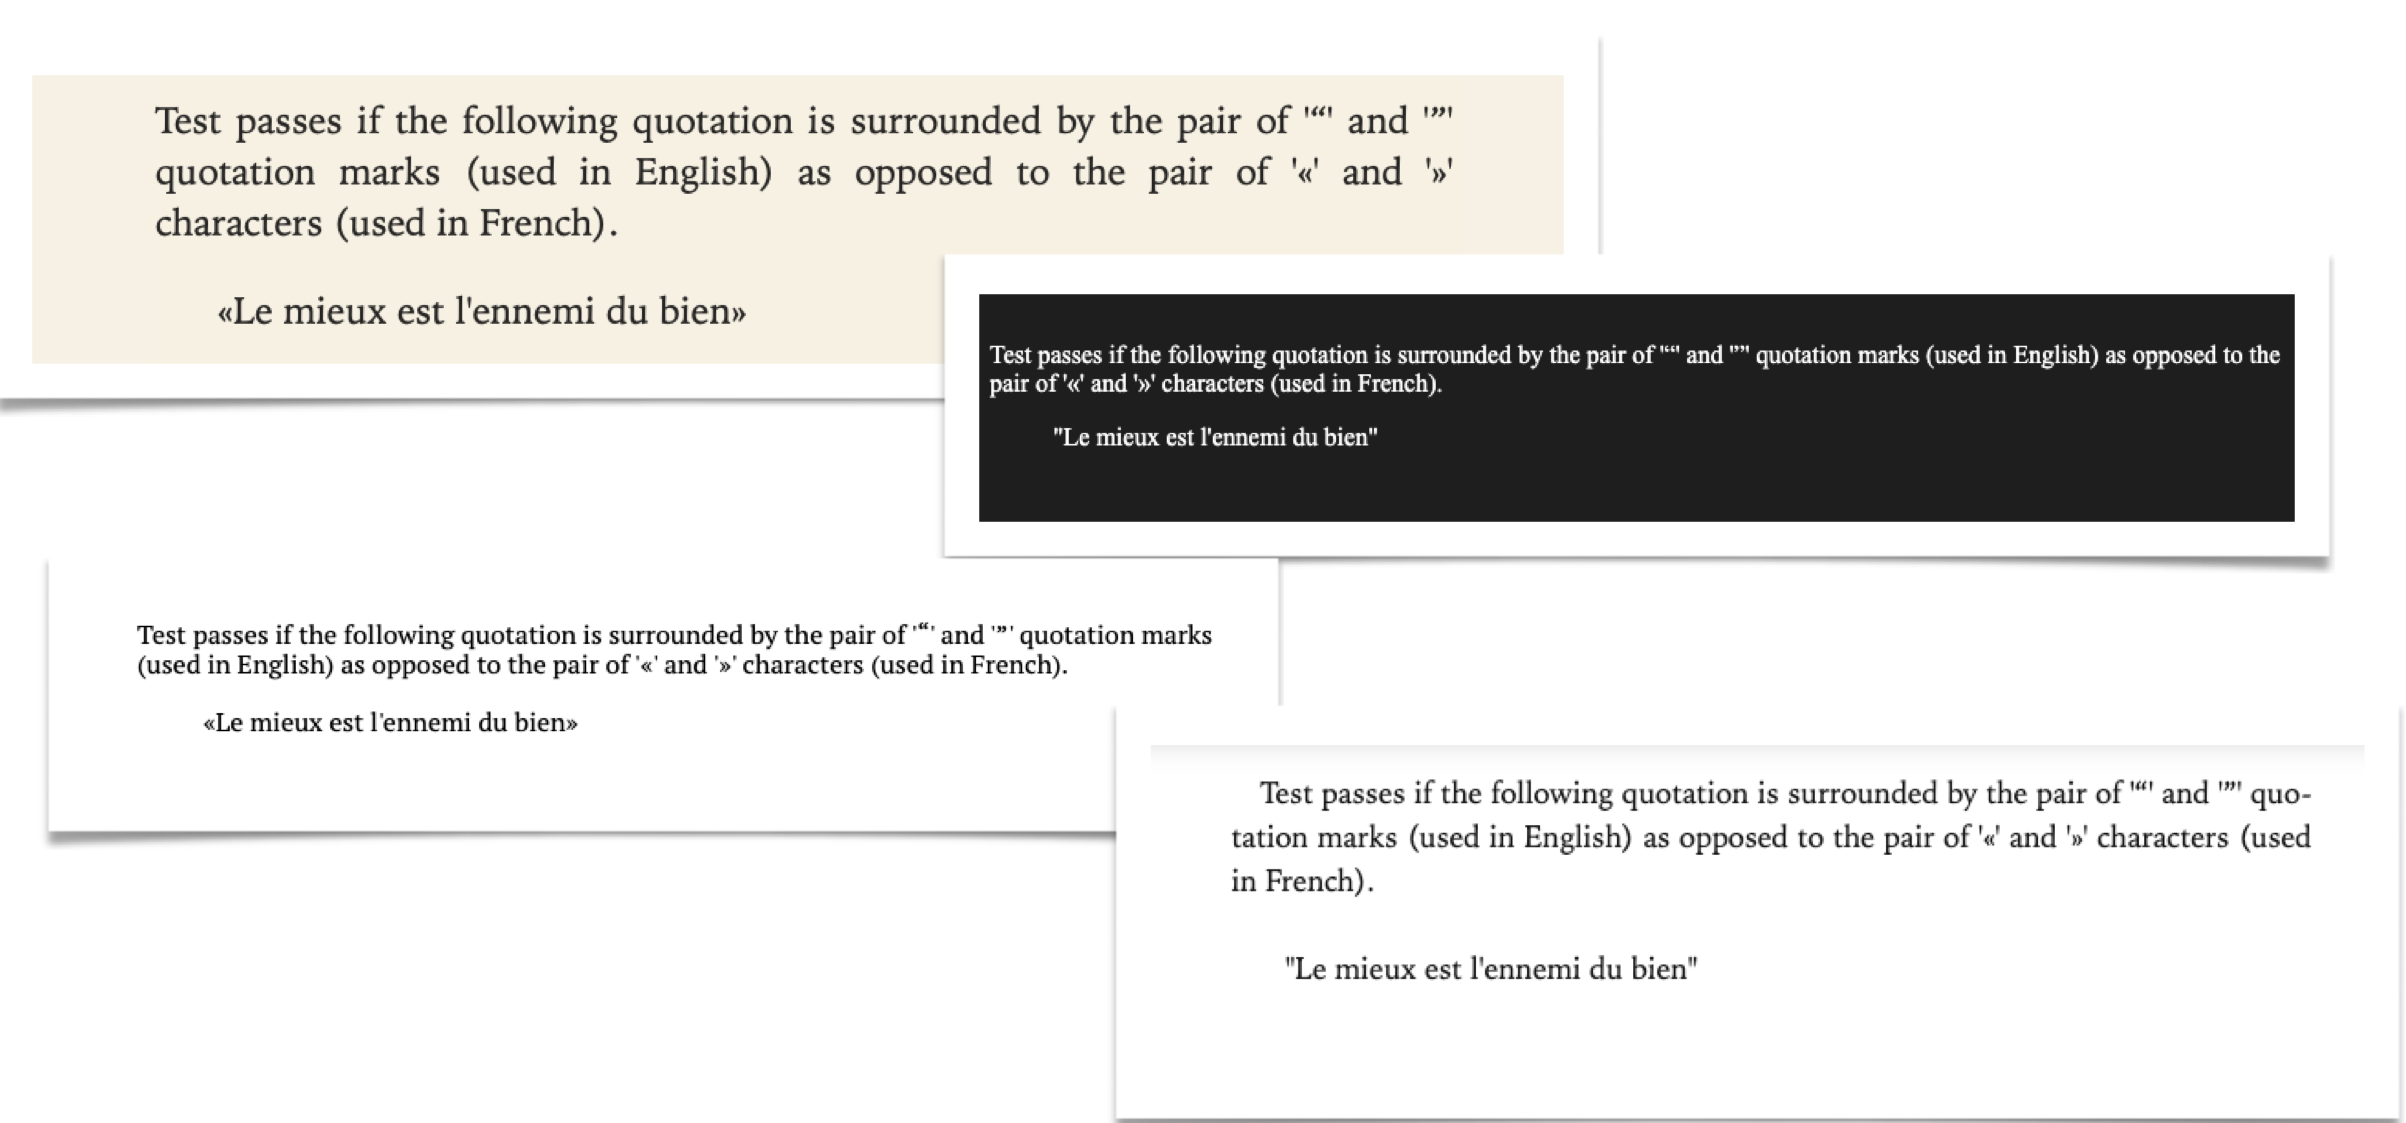 Four screen dumps with an English text and a French quote; the text describes that the quote must not be surrounded by the « and » characters (which is the French way of quoting) for the test to pass. Two screen dumps get it right, two get it wrong